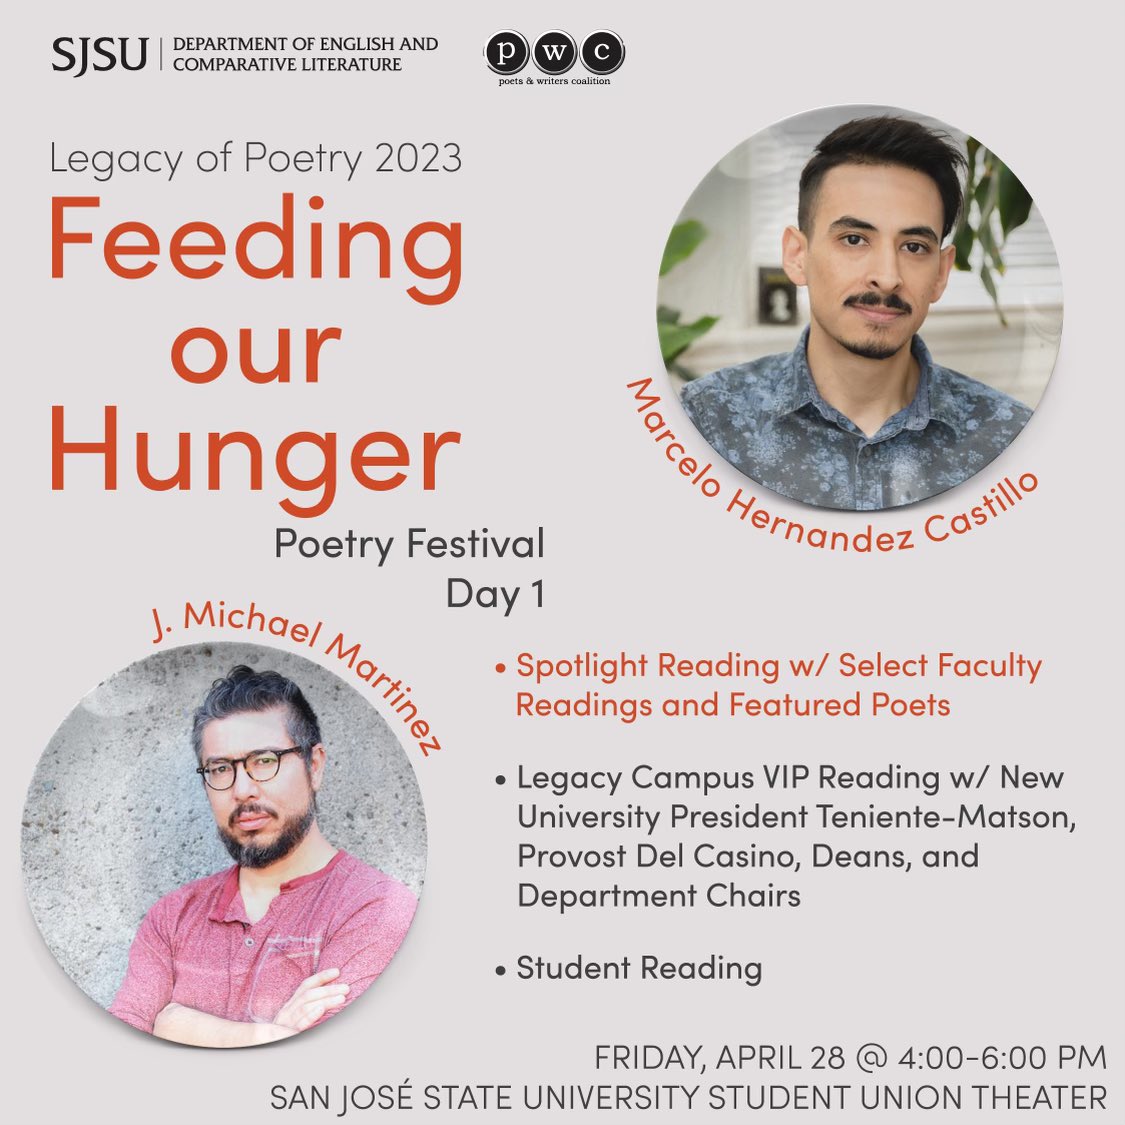 Day 1 of the festival is upon us, here’s what to expect on Friday🤩:
-@SJSU LOP readings📖
-Special appearances by them! 👬🏻

Click the link to reserve a spot to the event for FREE!😉💻
sjsu.edu/legacyofpoetry…

#poetryfestival
#LOP23 #FeedingOurHungerwithPoetry
#SJSULegacyofPoetry